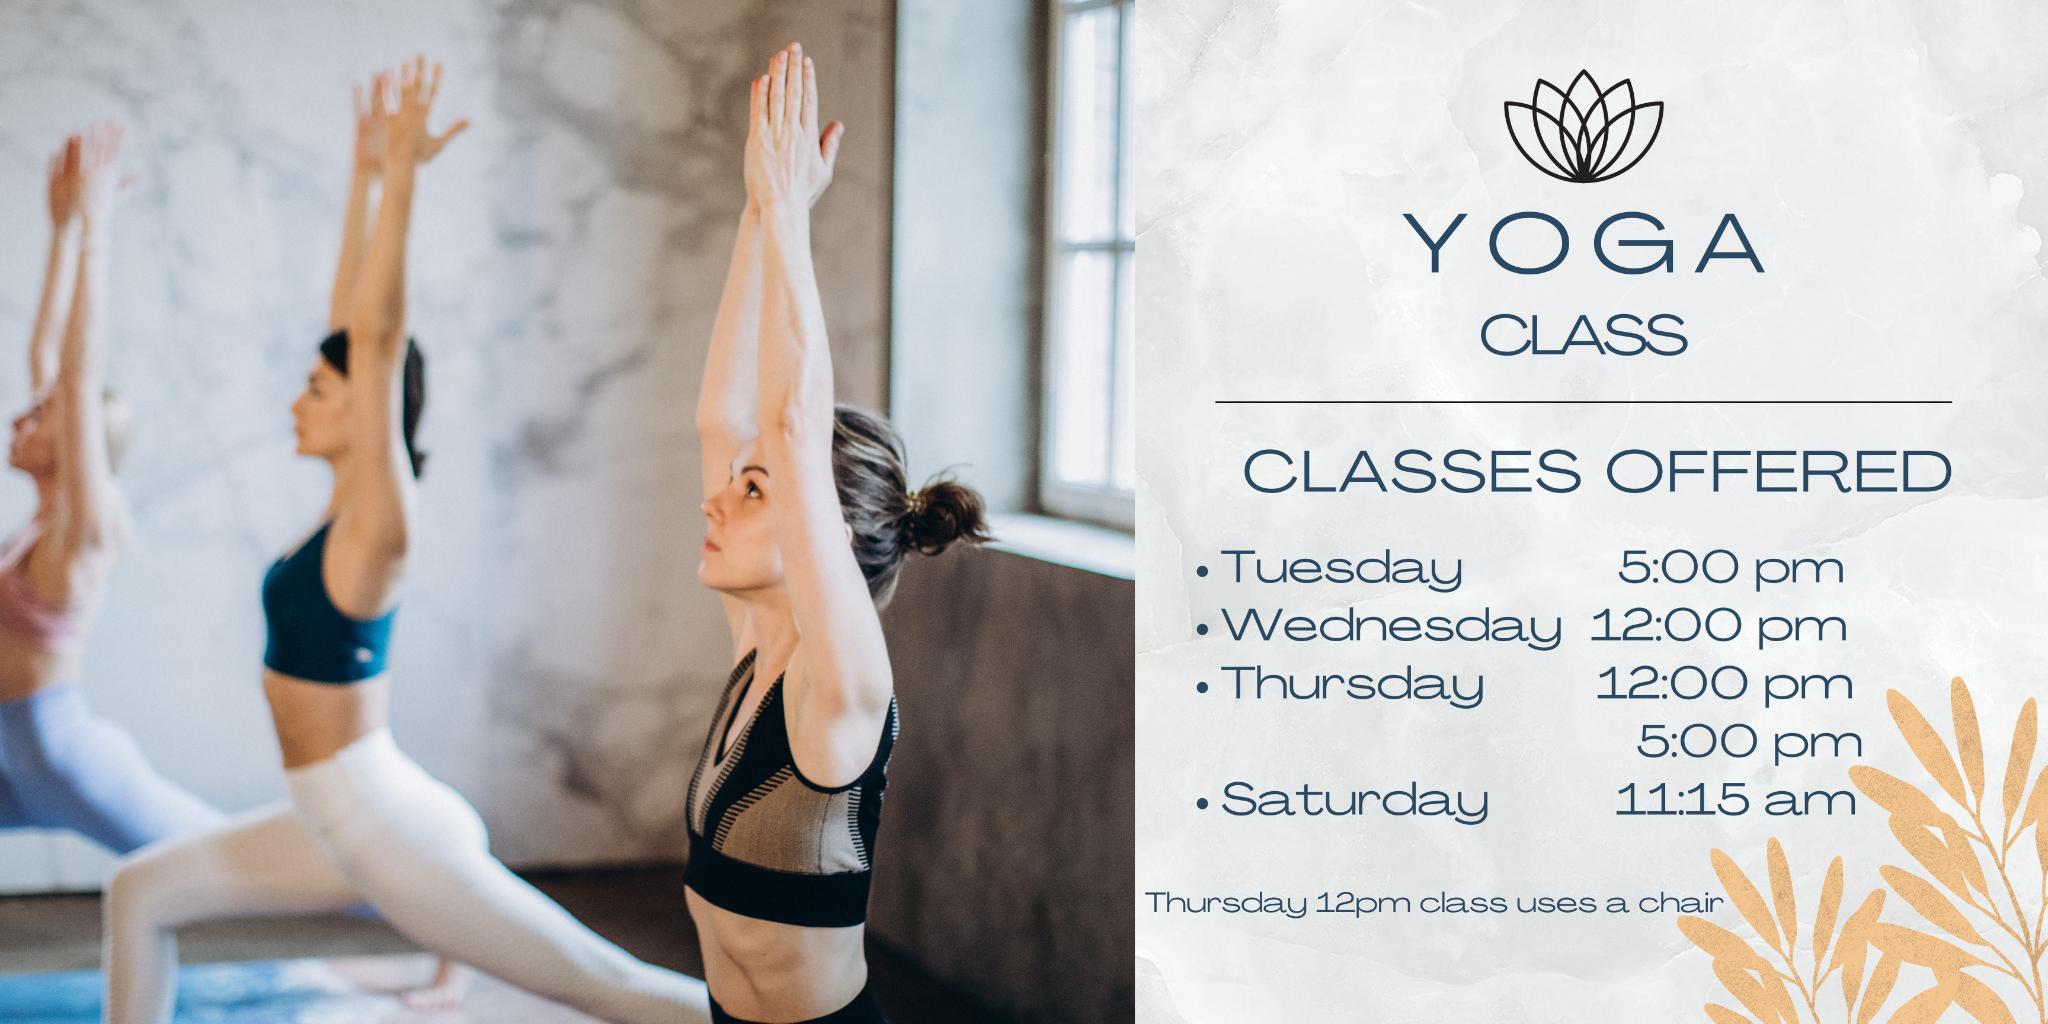 Yoga classes offered Tuesday Wednesday Thursday and Saturday